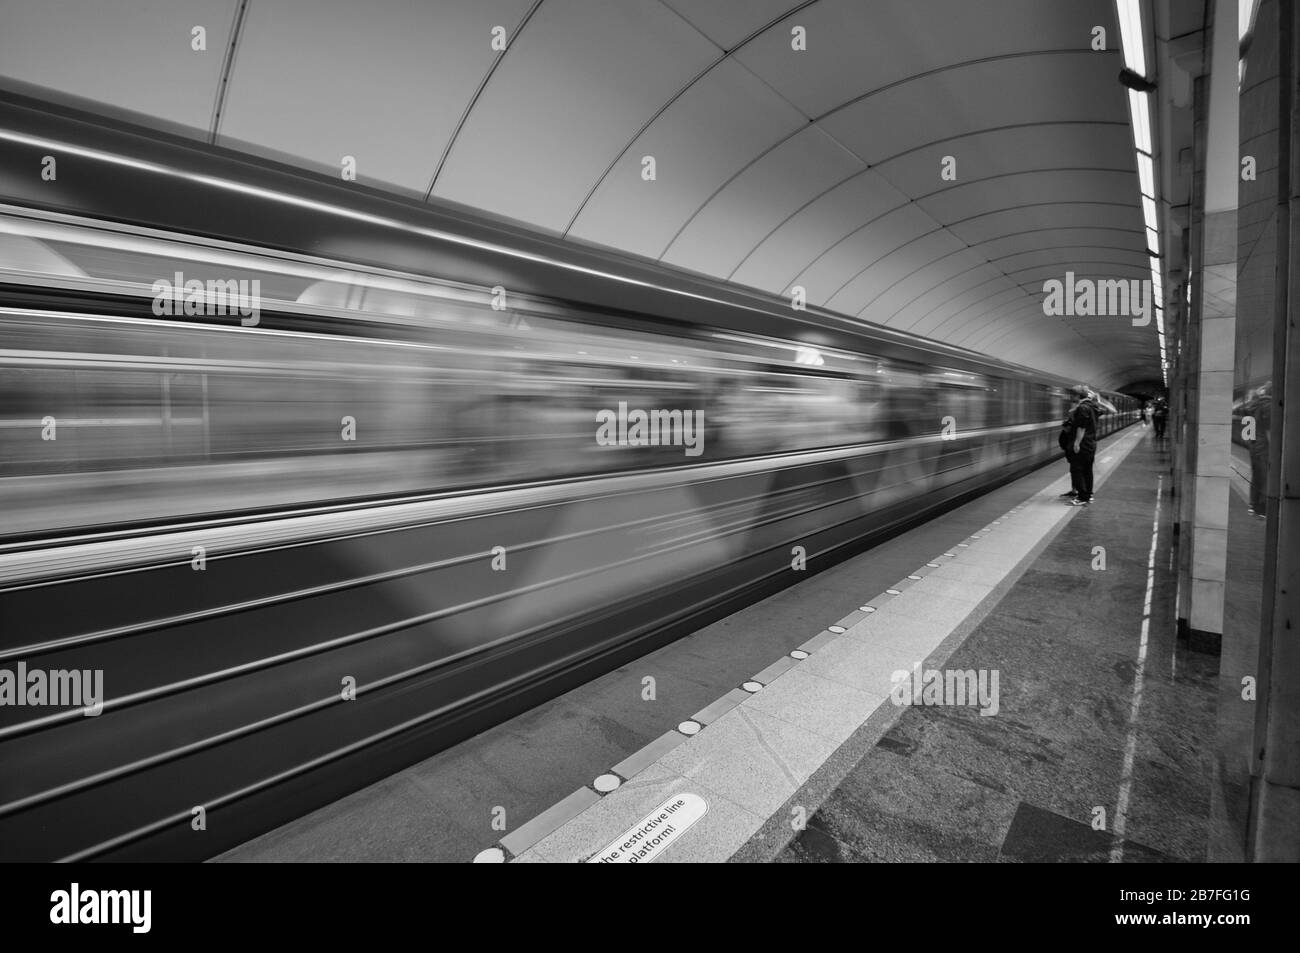 Subway stations in St Petersburg, Russia Stock Photo